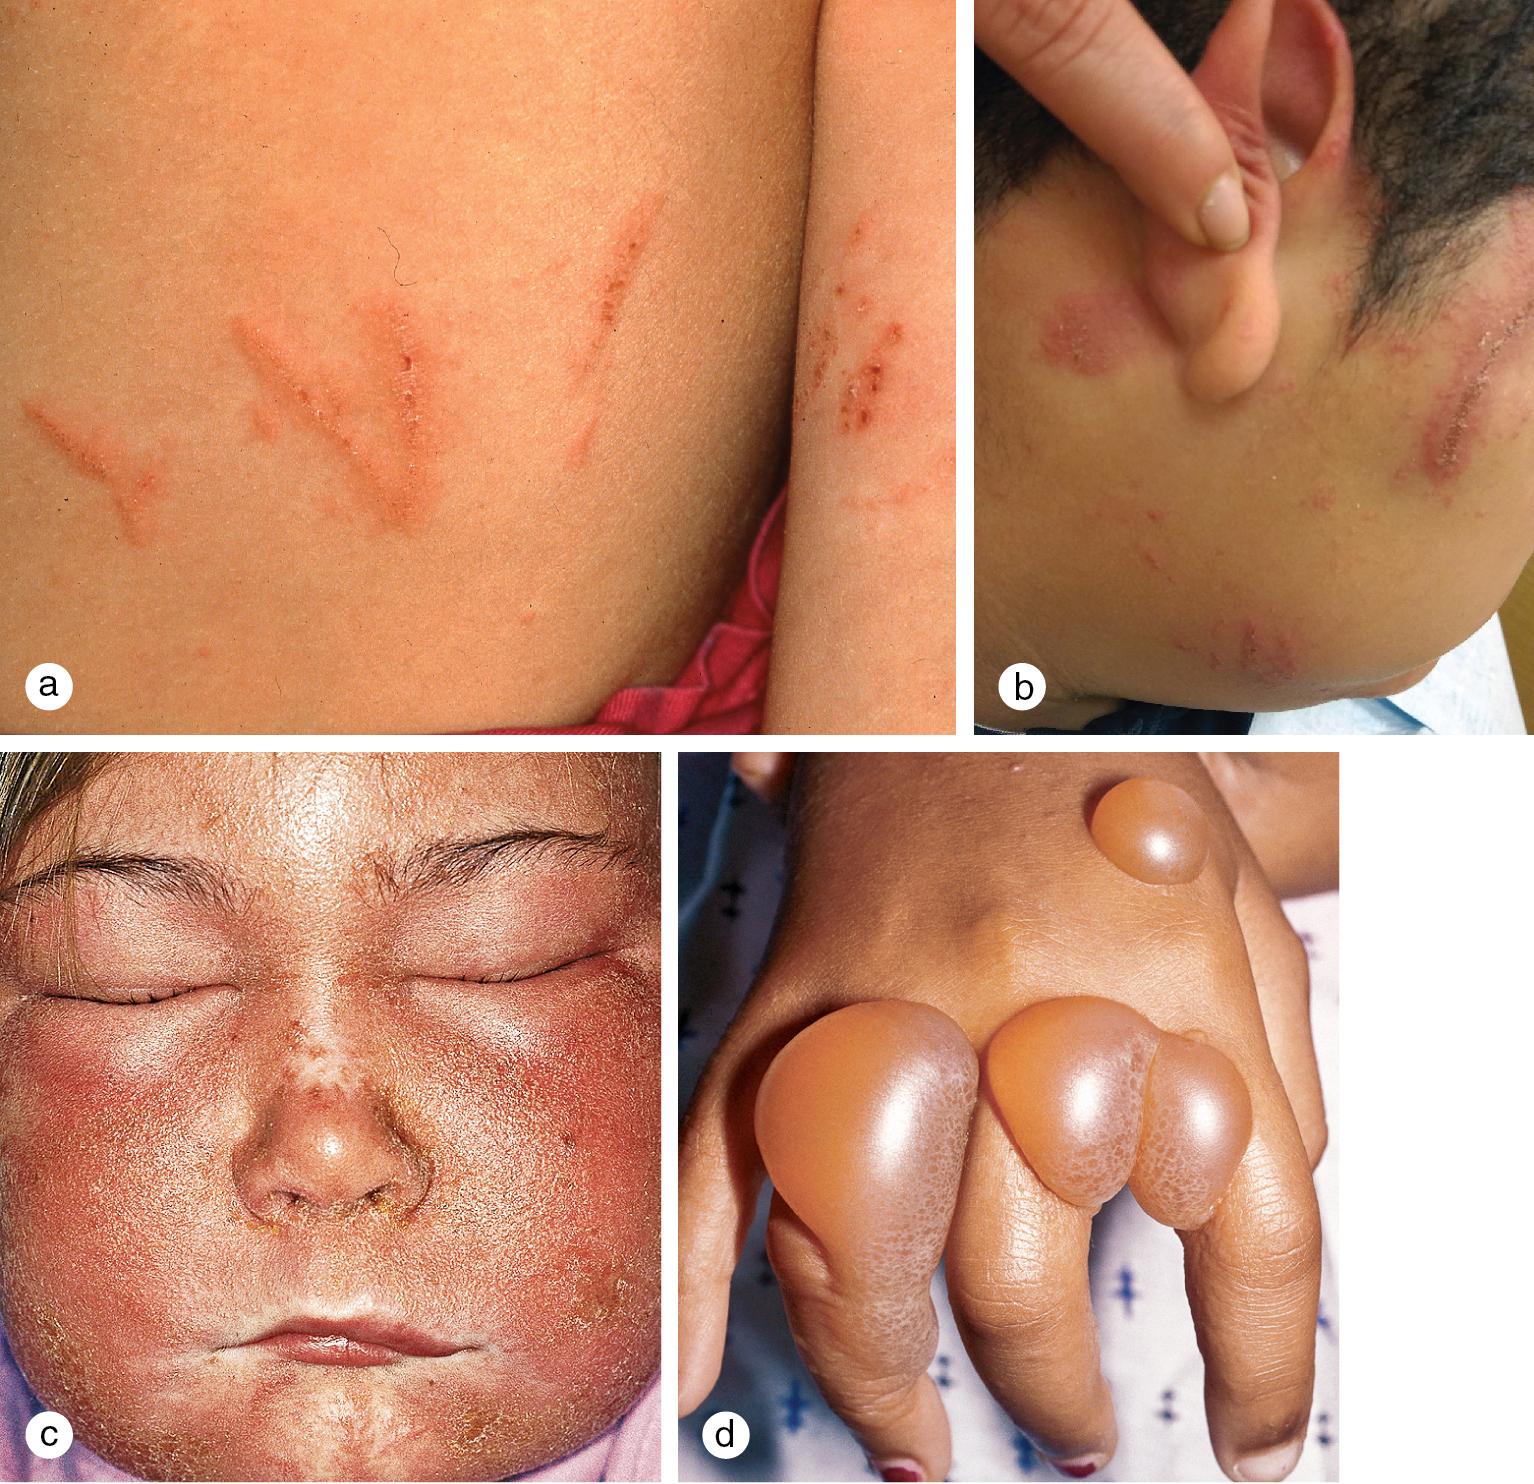 Fig. 3.15, Poison ivy or rhus dermatitis. (a) Crusted papules forming linear plaques were noted on the left side of the abdomen and left arm of this 11-year-old boy several days after a hike in the woods. (b) Similar lesions appeared on the face of this 7-year-old boy. (c) A 10-year-old girl developed intense facial edema after brushing against poison ivy. (d) In highly sensitized children, large blisters can develop. This child was swinging from vines in the woods.